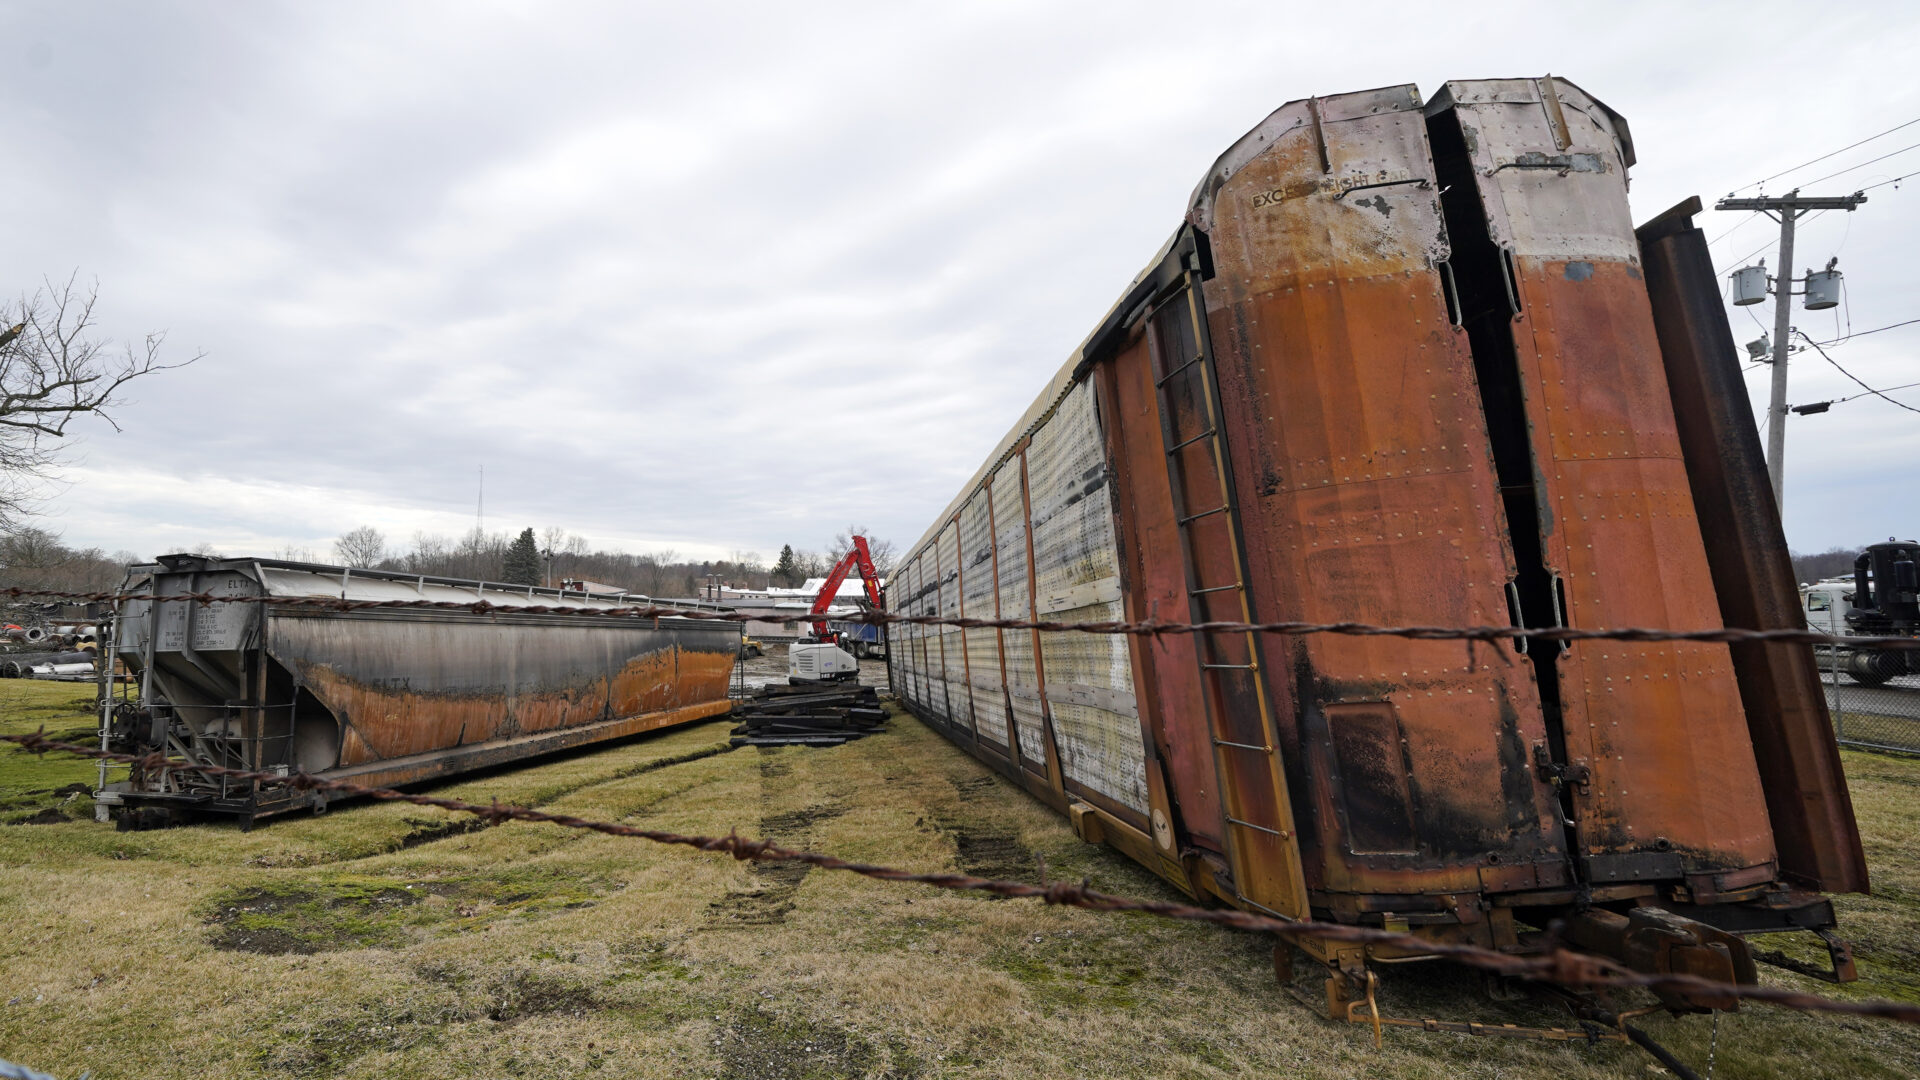 Some of the railcars that derailed Friday night when a Norfolk Southern freight train derailed are in the process of being cleaned up on Thursday, Feb. 9, 2023 in East Palestine, Ohio.